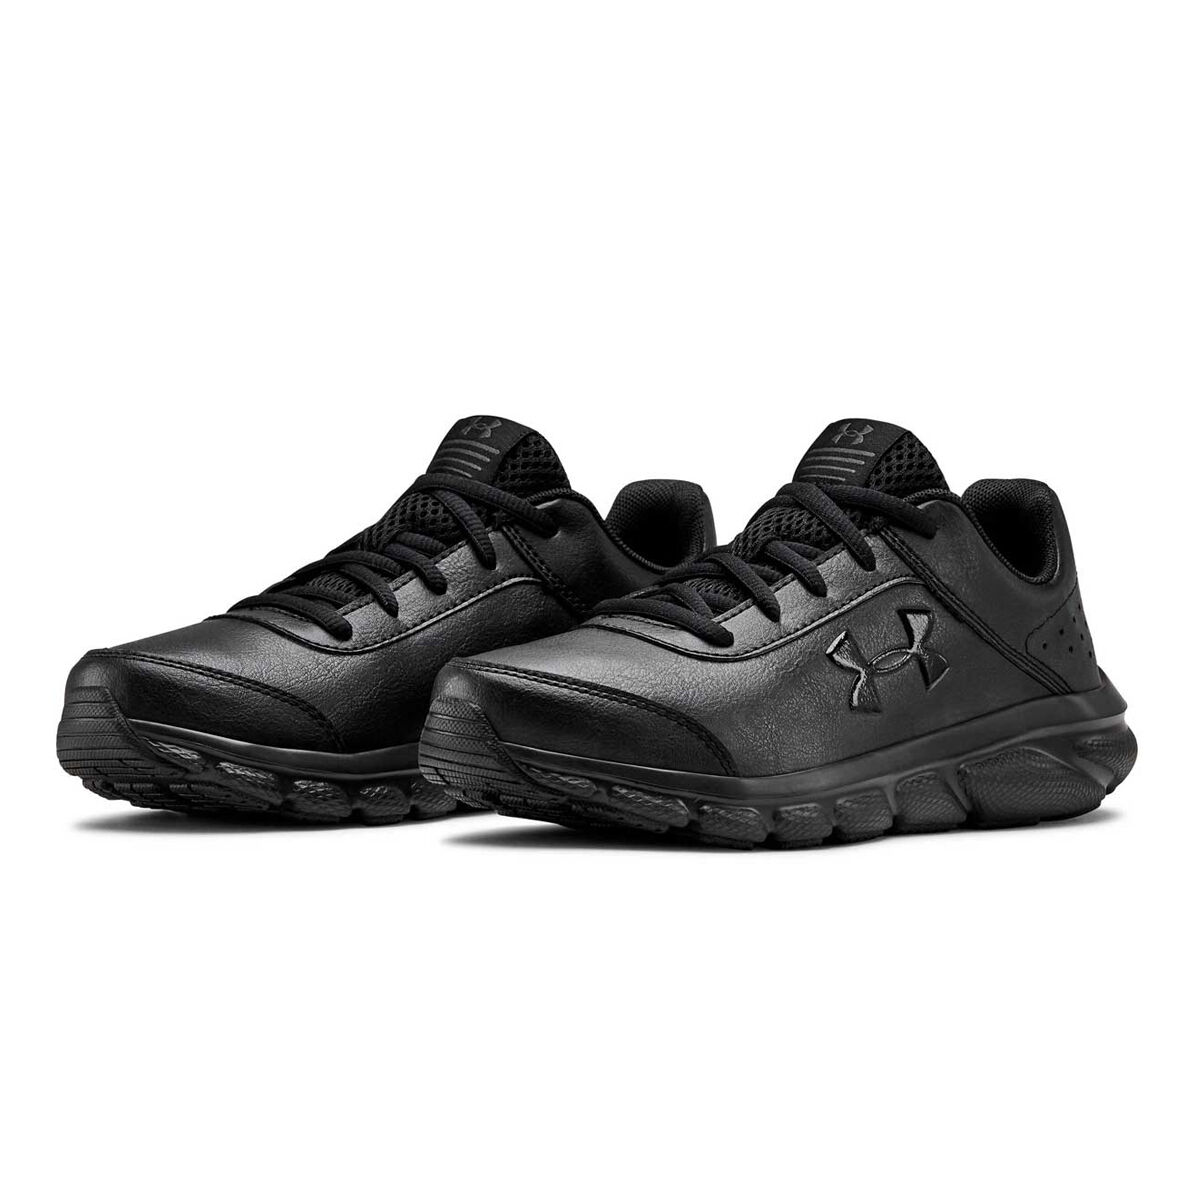 gray and black under armour shoes